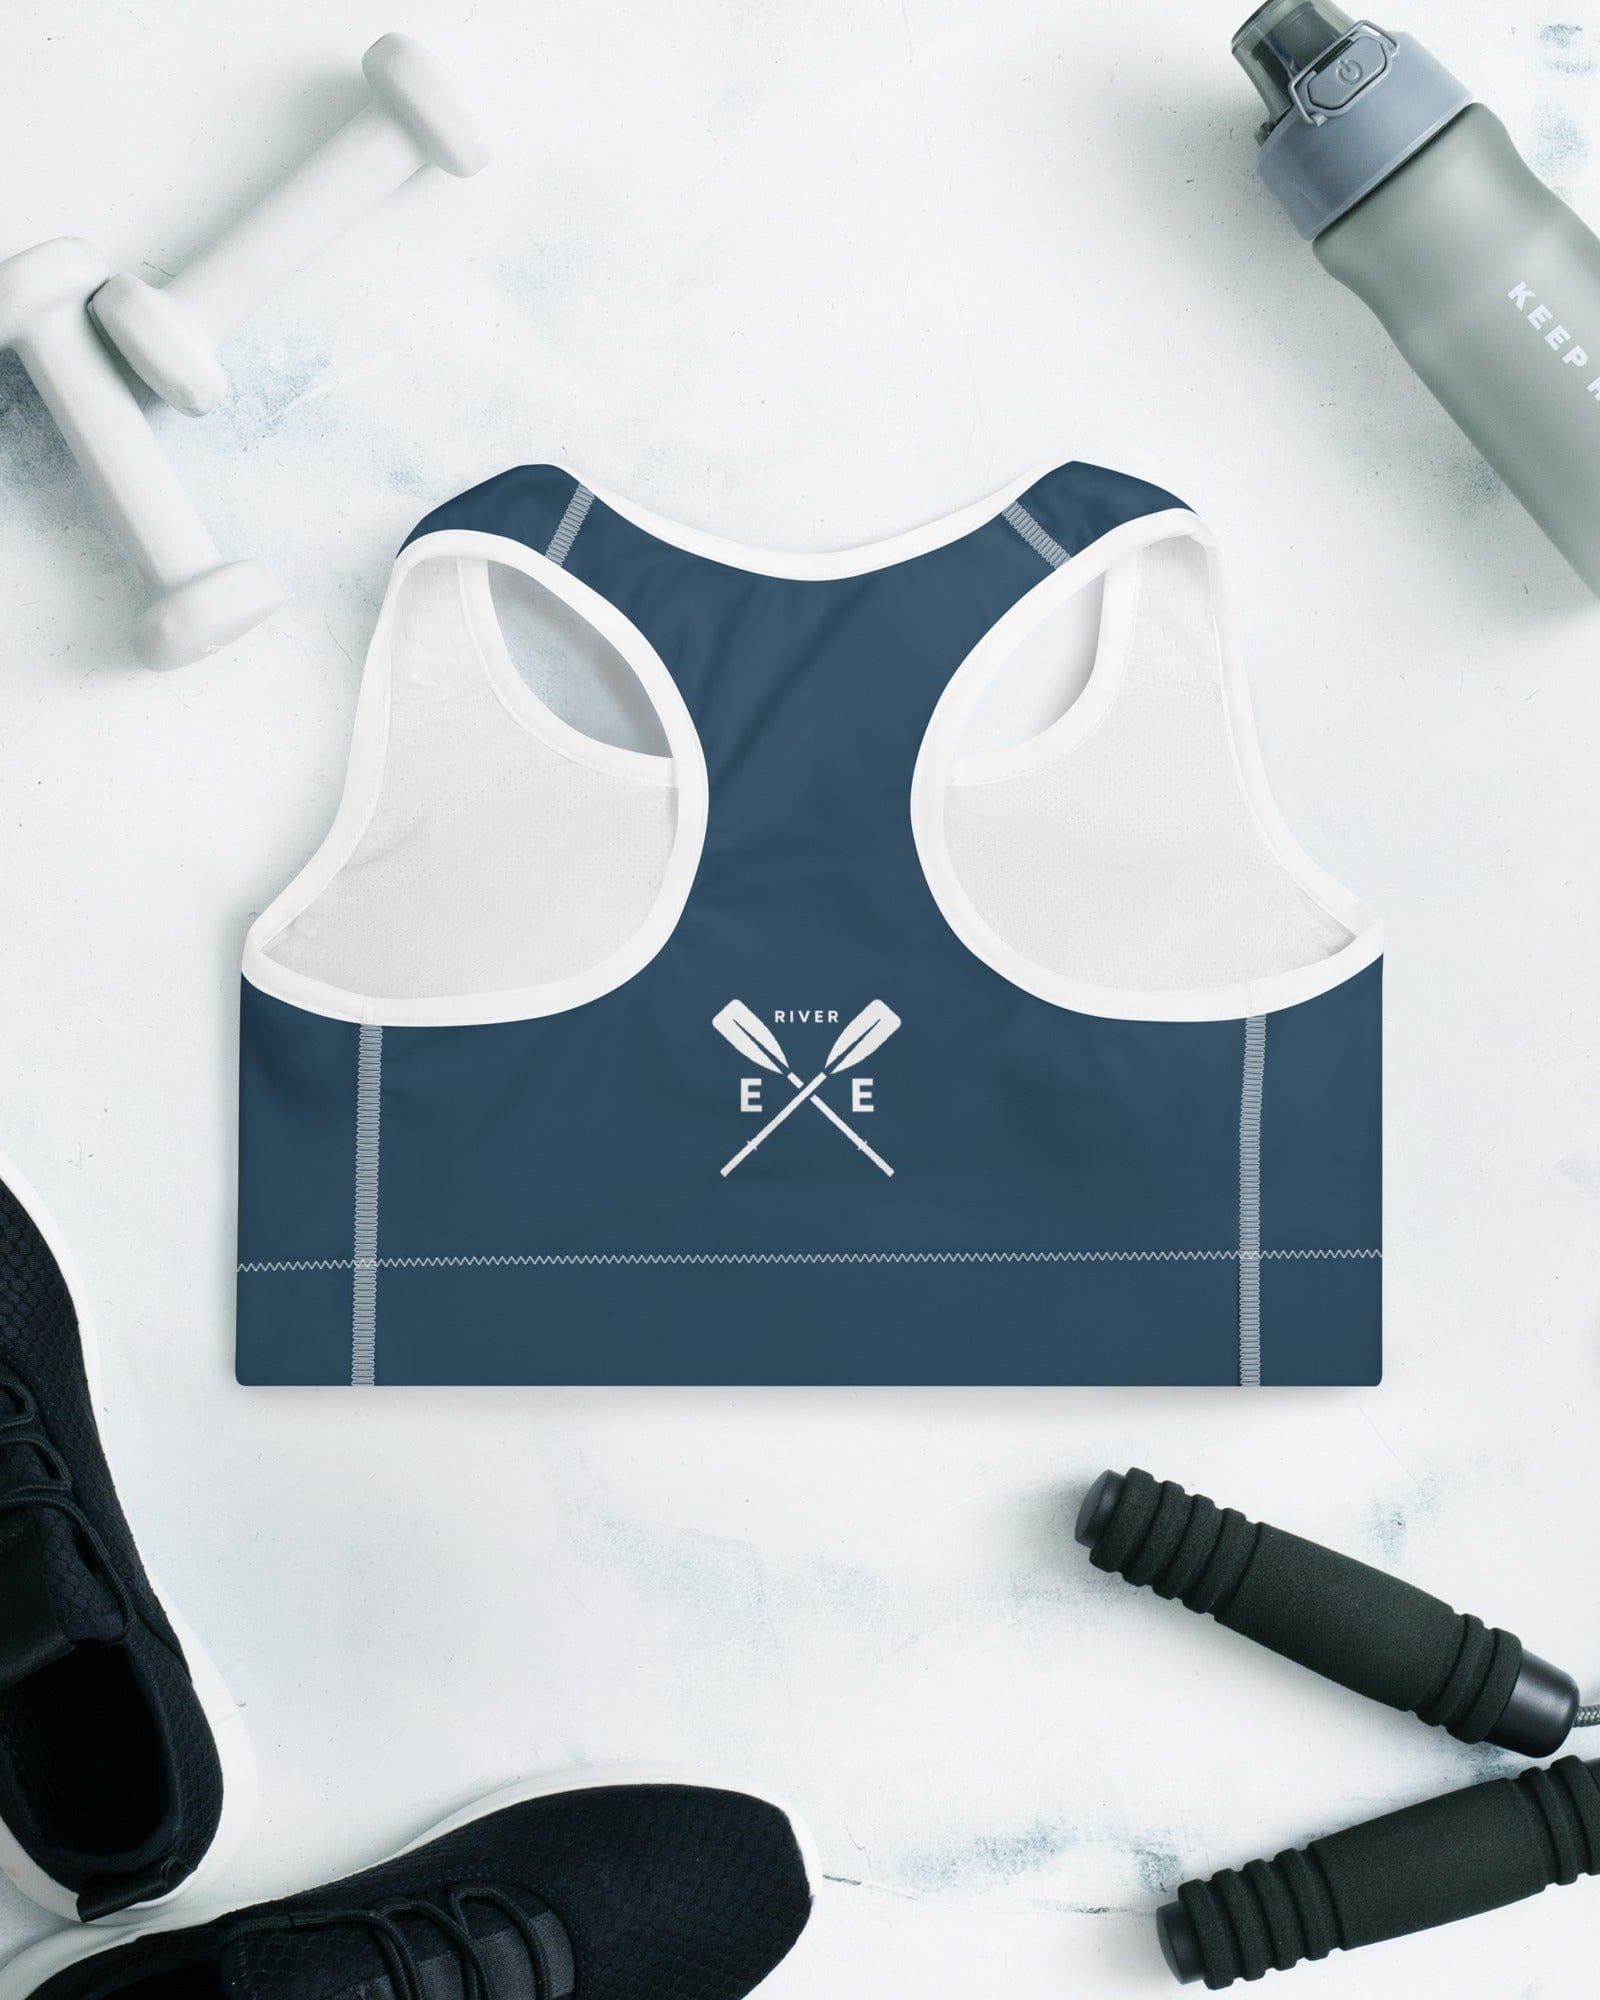 River Exe Padded Sports Bra | Exeter Shop XS sports bras Jolly & Goode